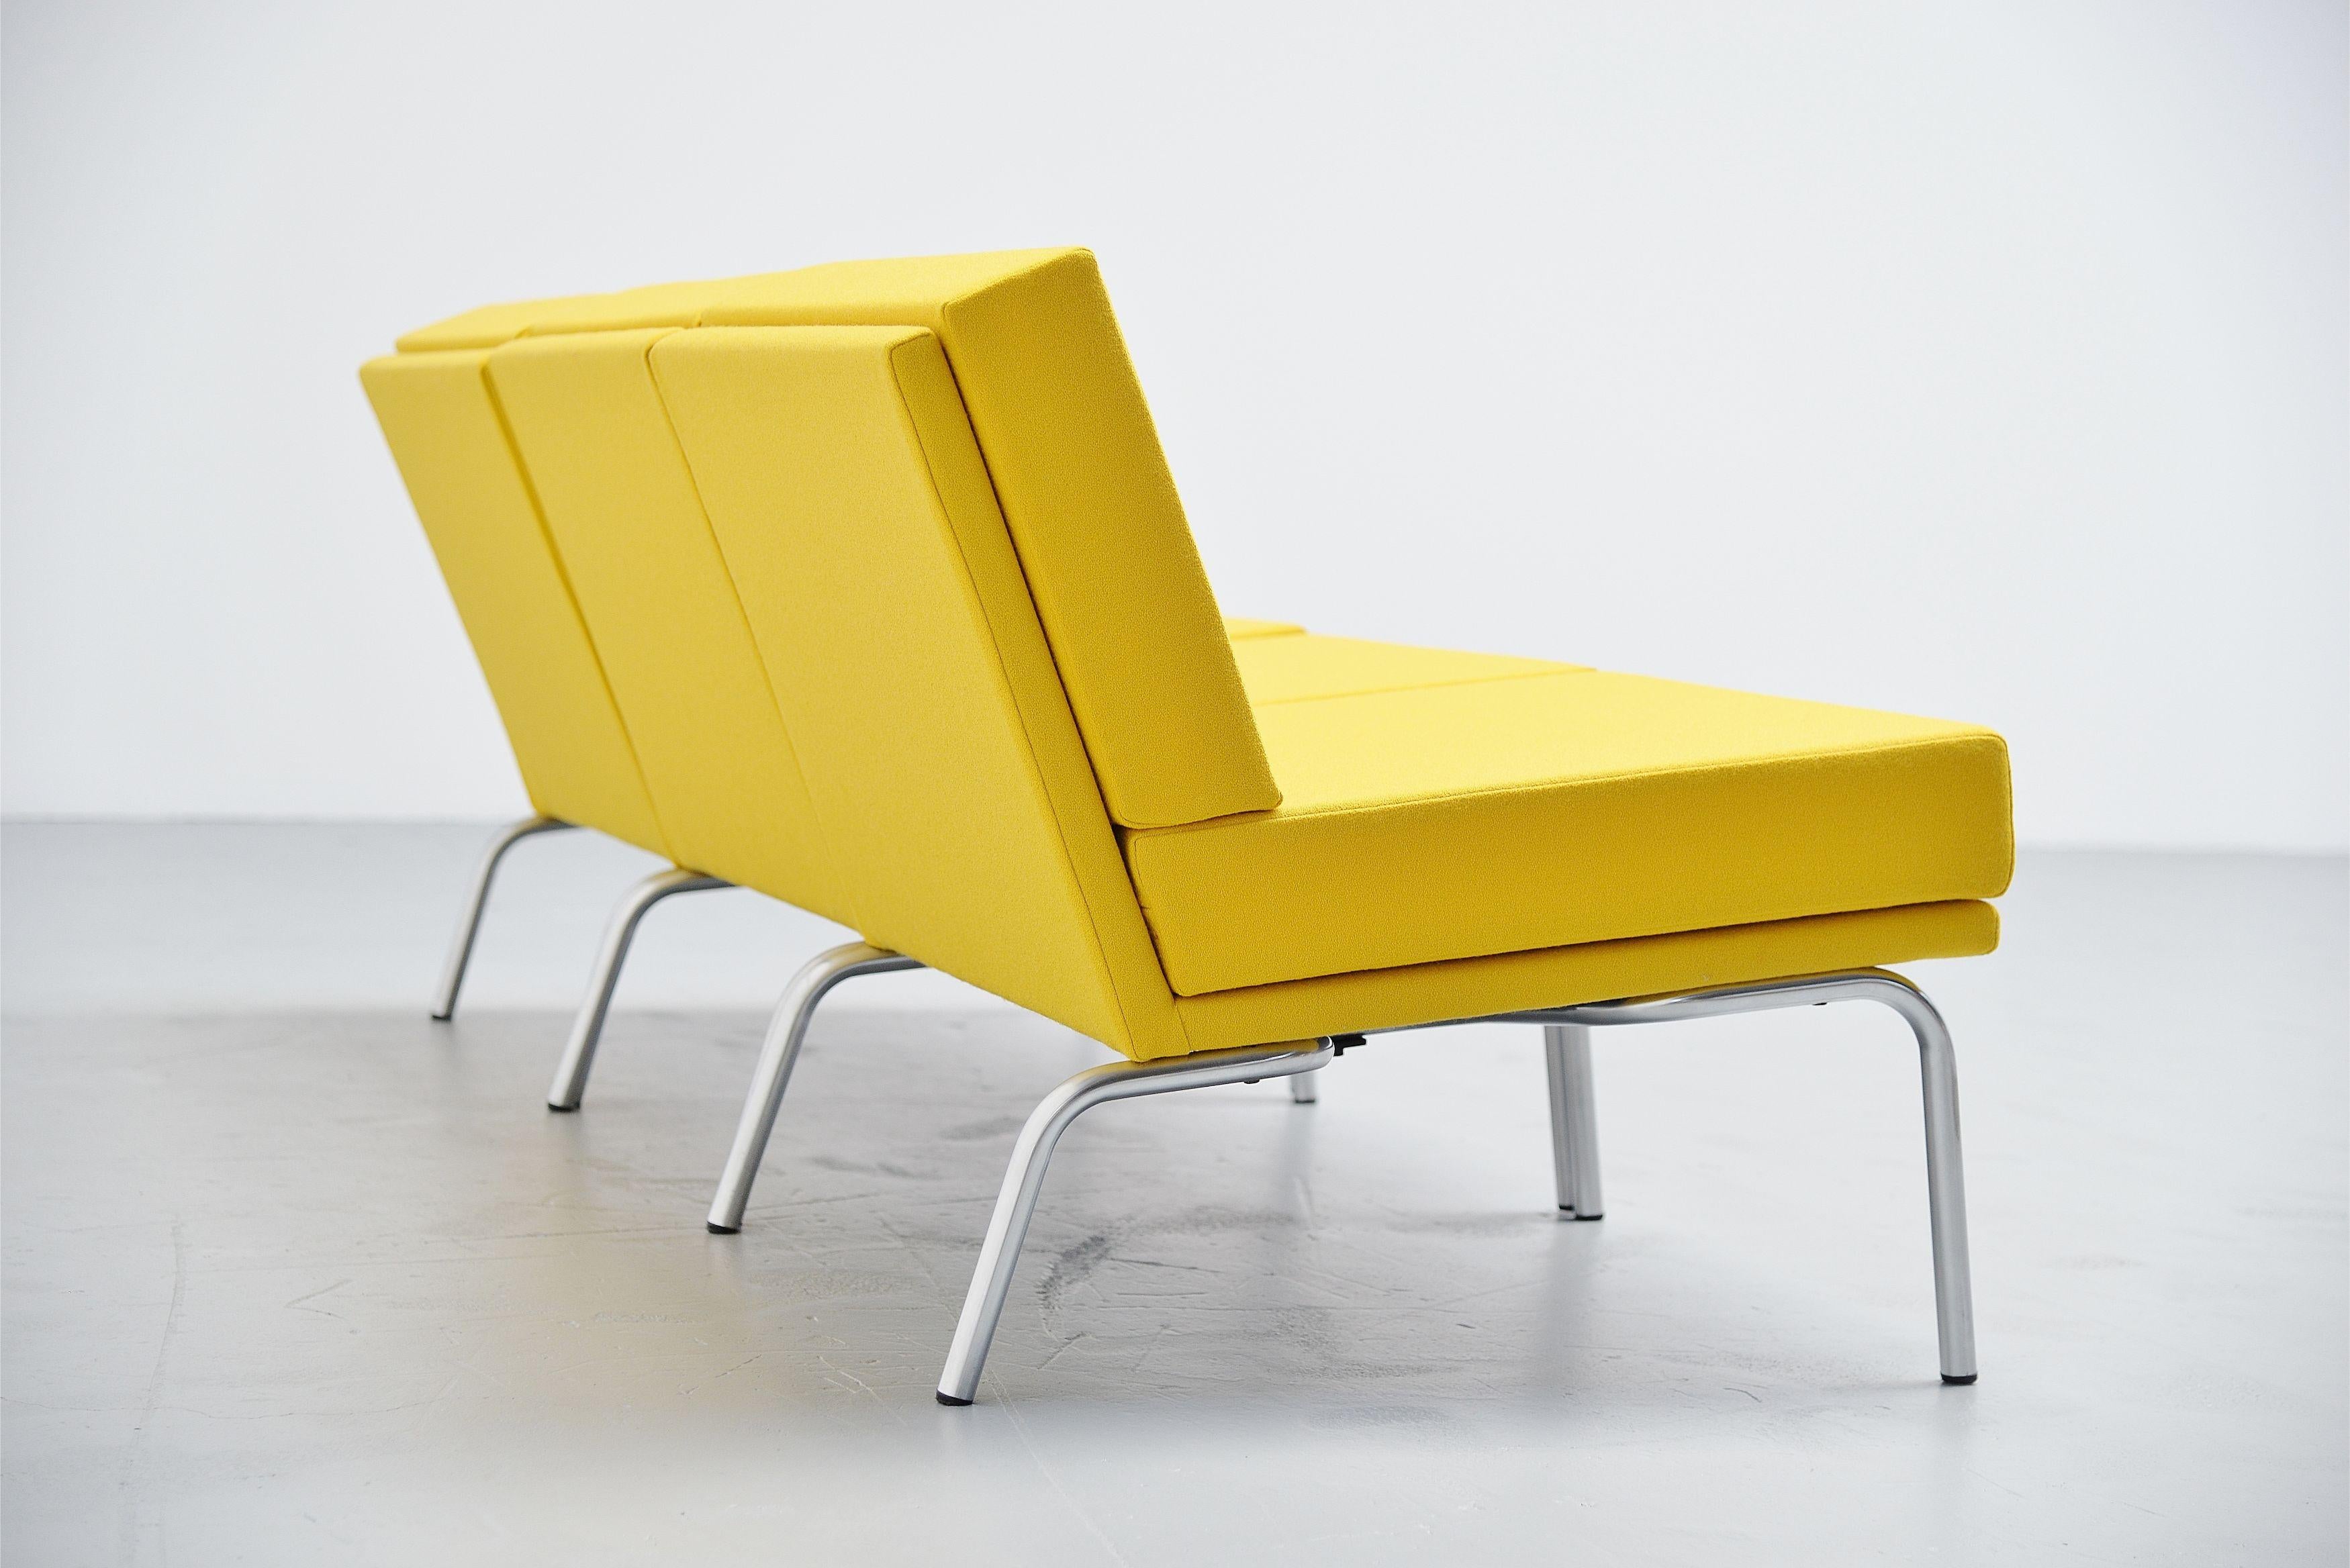 Martin Visser SZ04 Lounge Chairs Sofa 't Spectrum, 1964 In Good Condition For Sale In Roosendaal, Noord Brabant